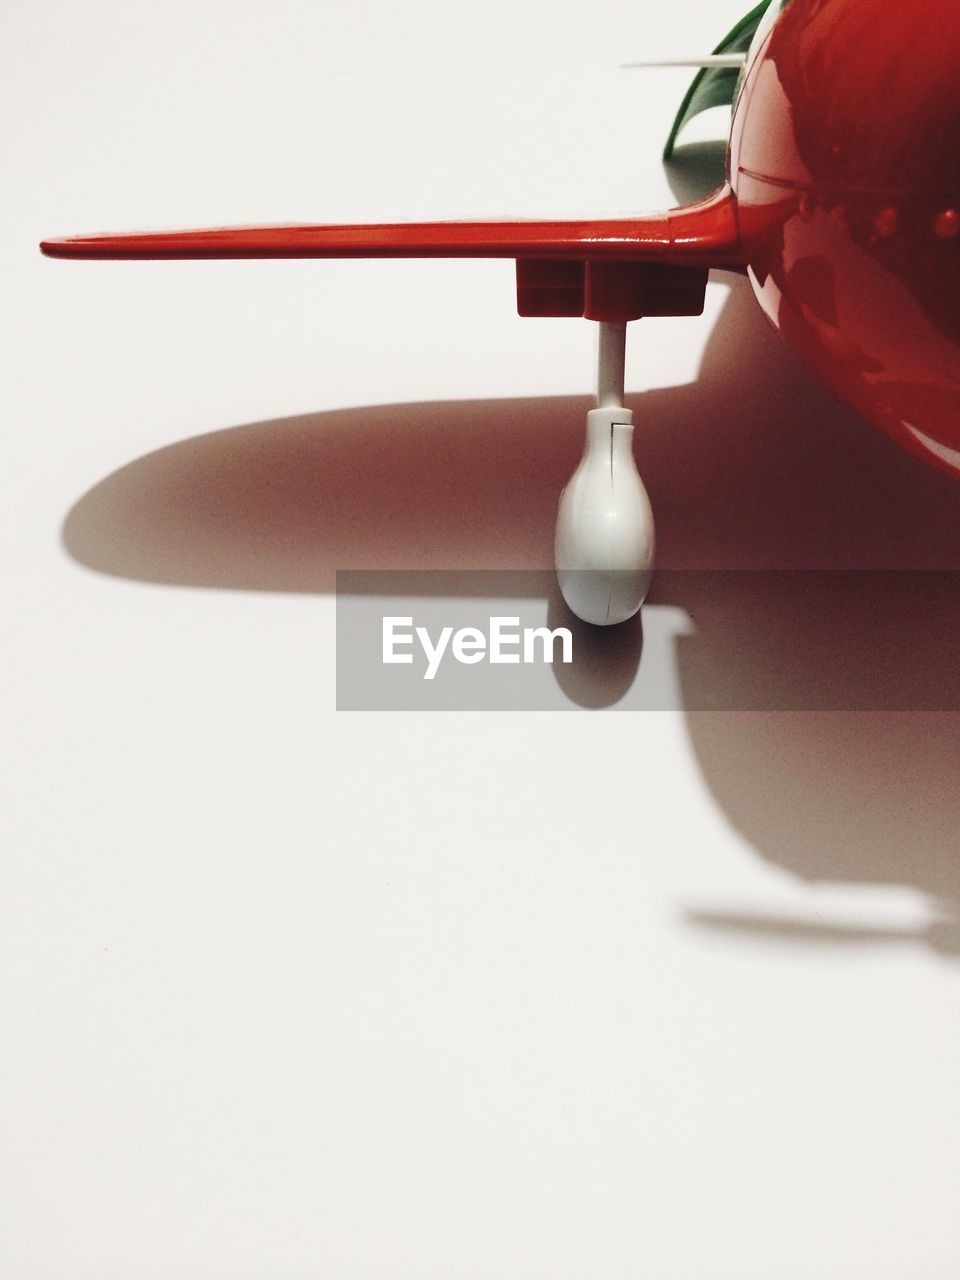 Cropped image of toy airplane over white background